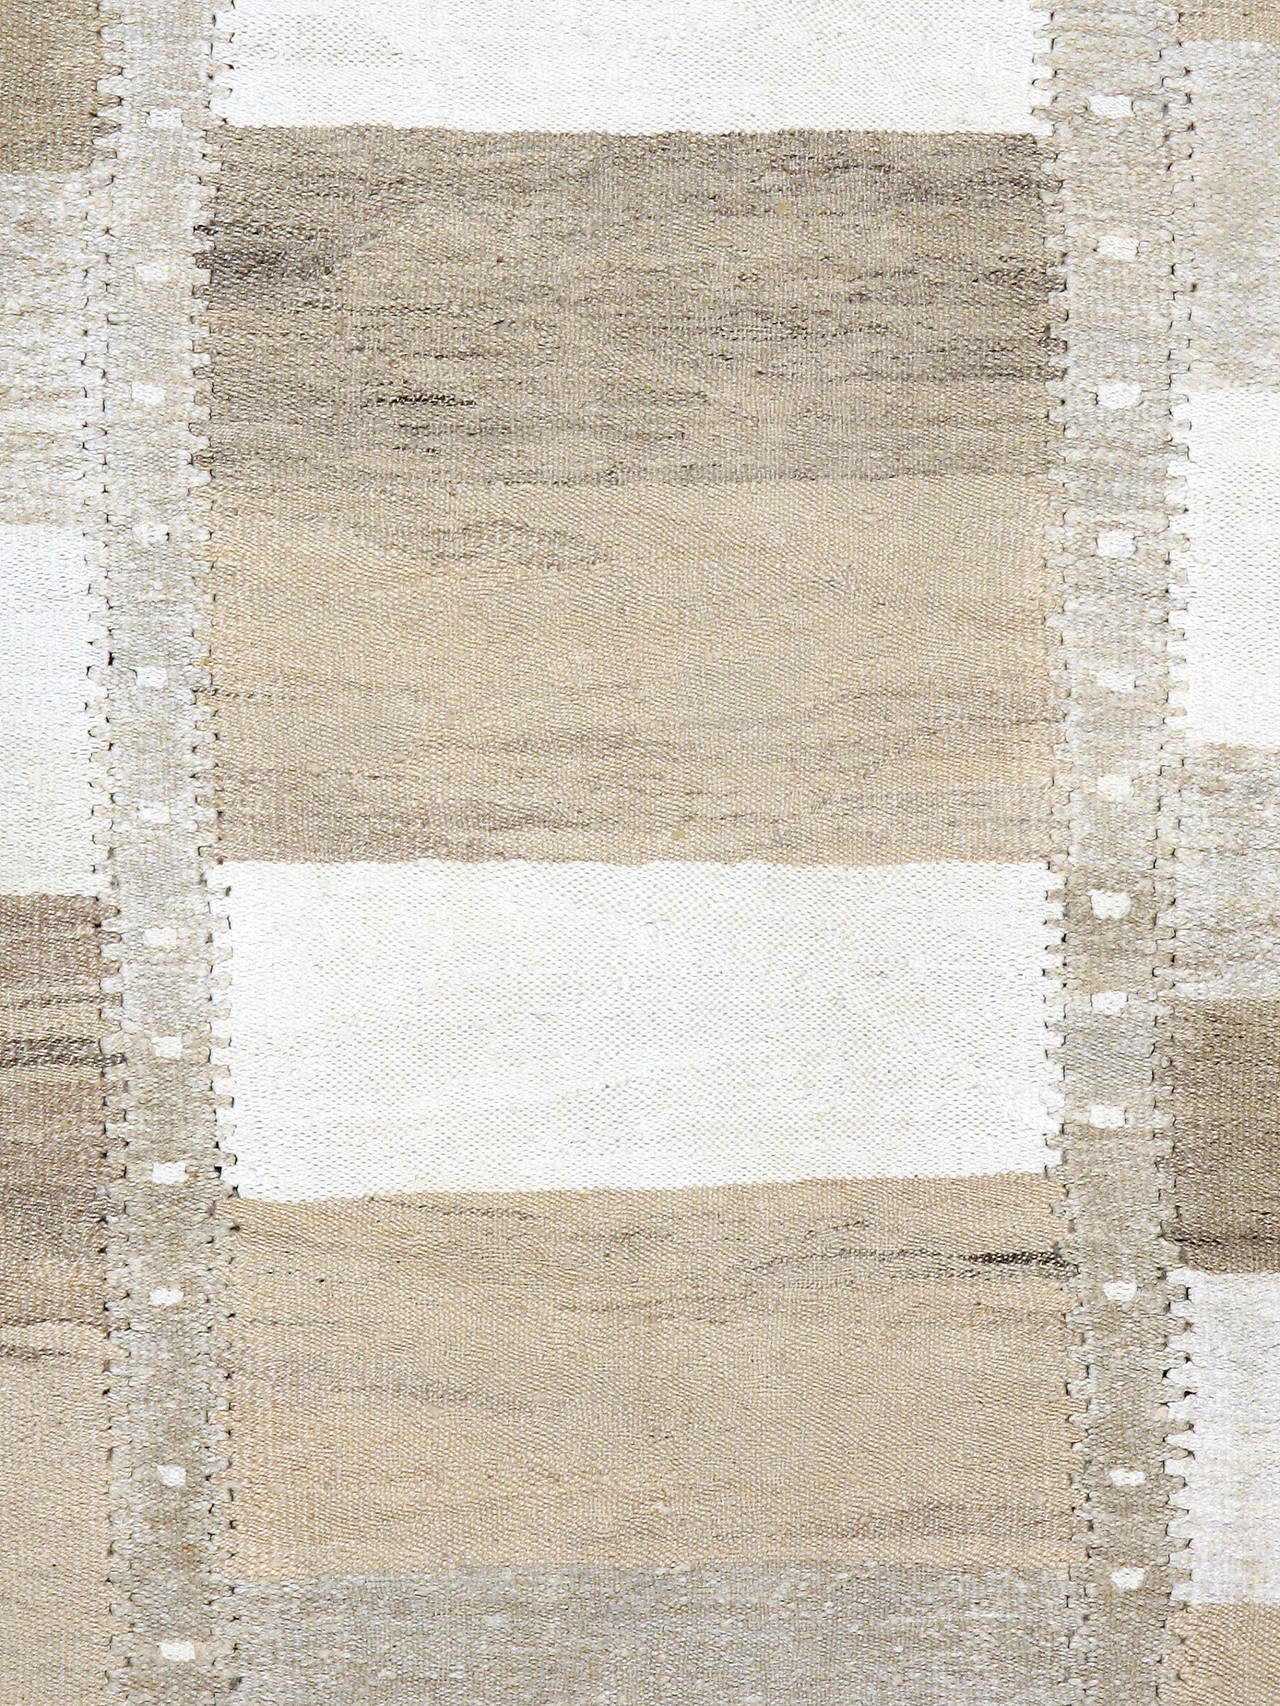 A modern Turkish Kilim flat-weave carpet from the fourth quarter of the 20th century. The rug is woven with repurposed old wool to create a vintage look and feel.